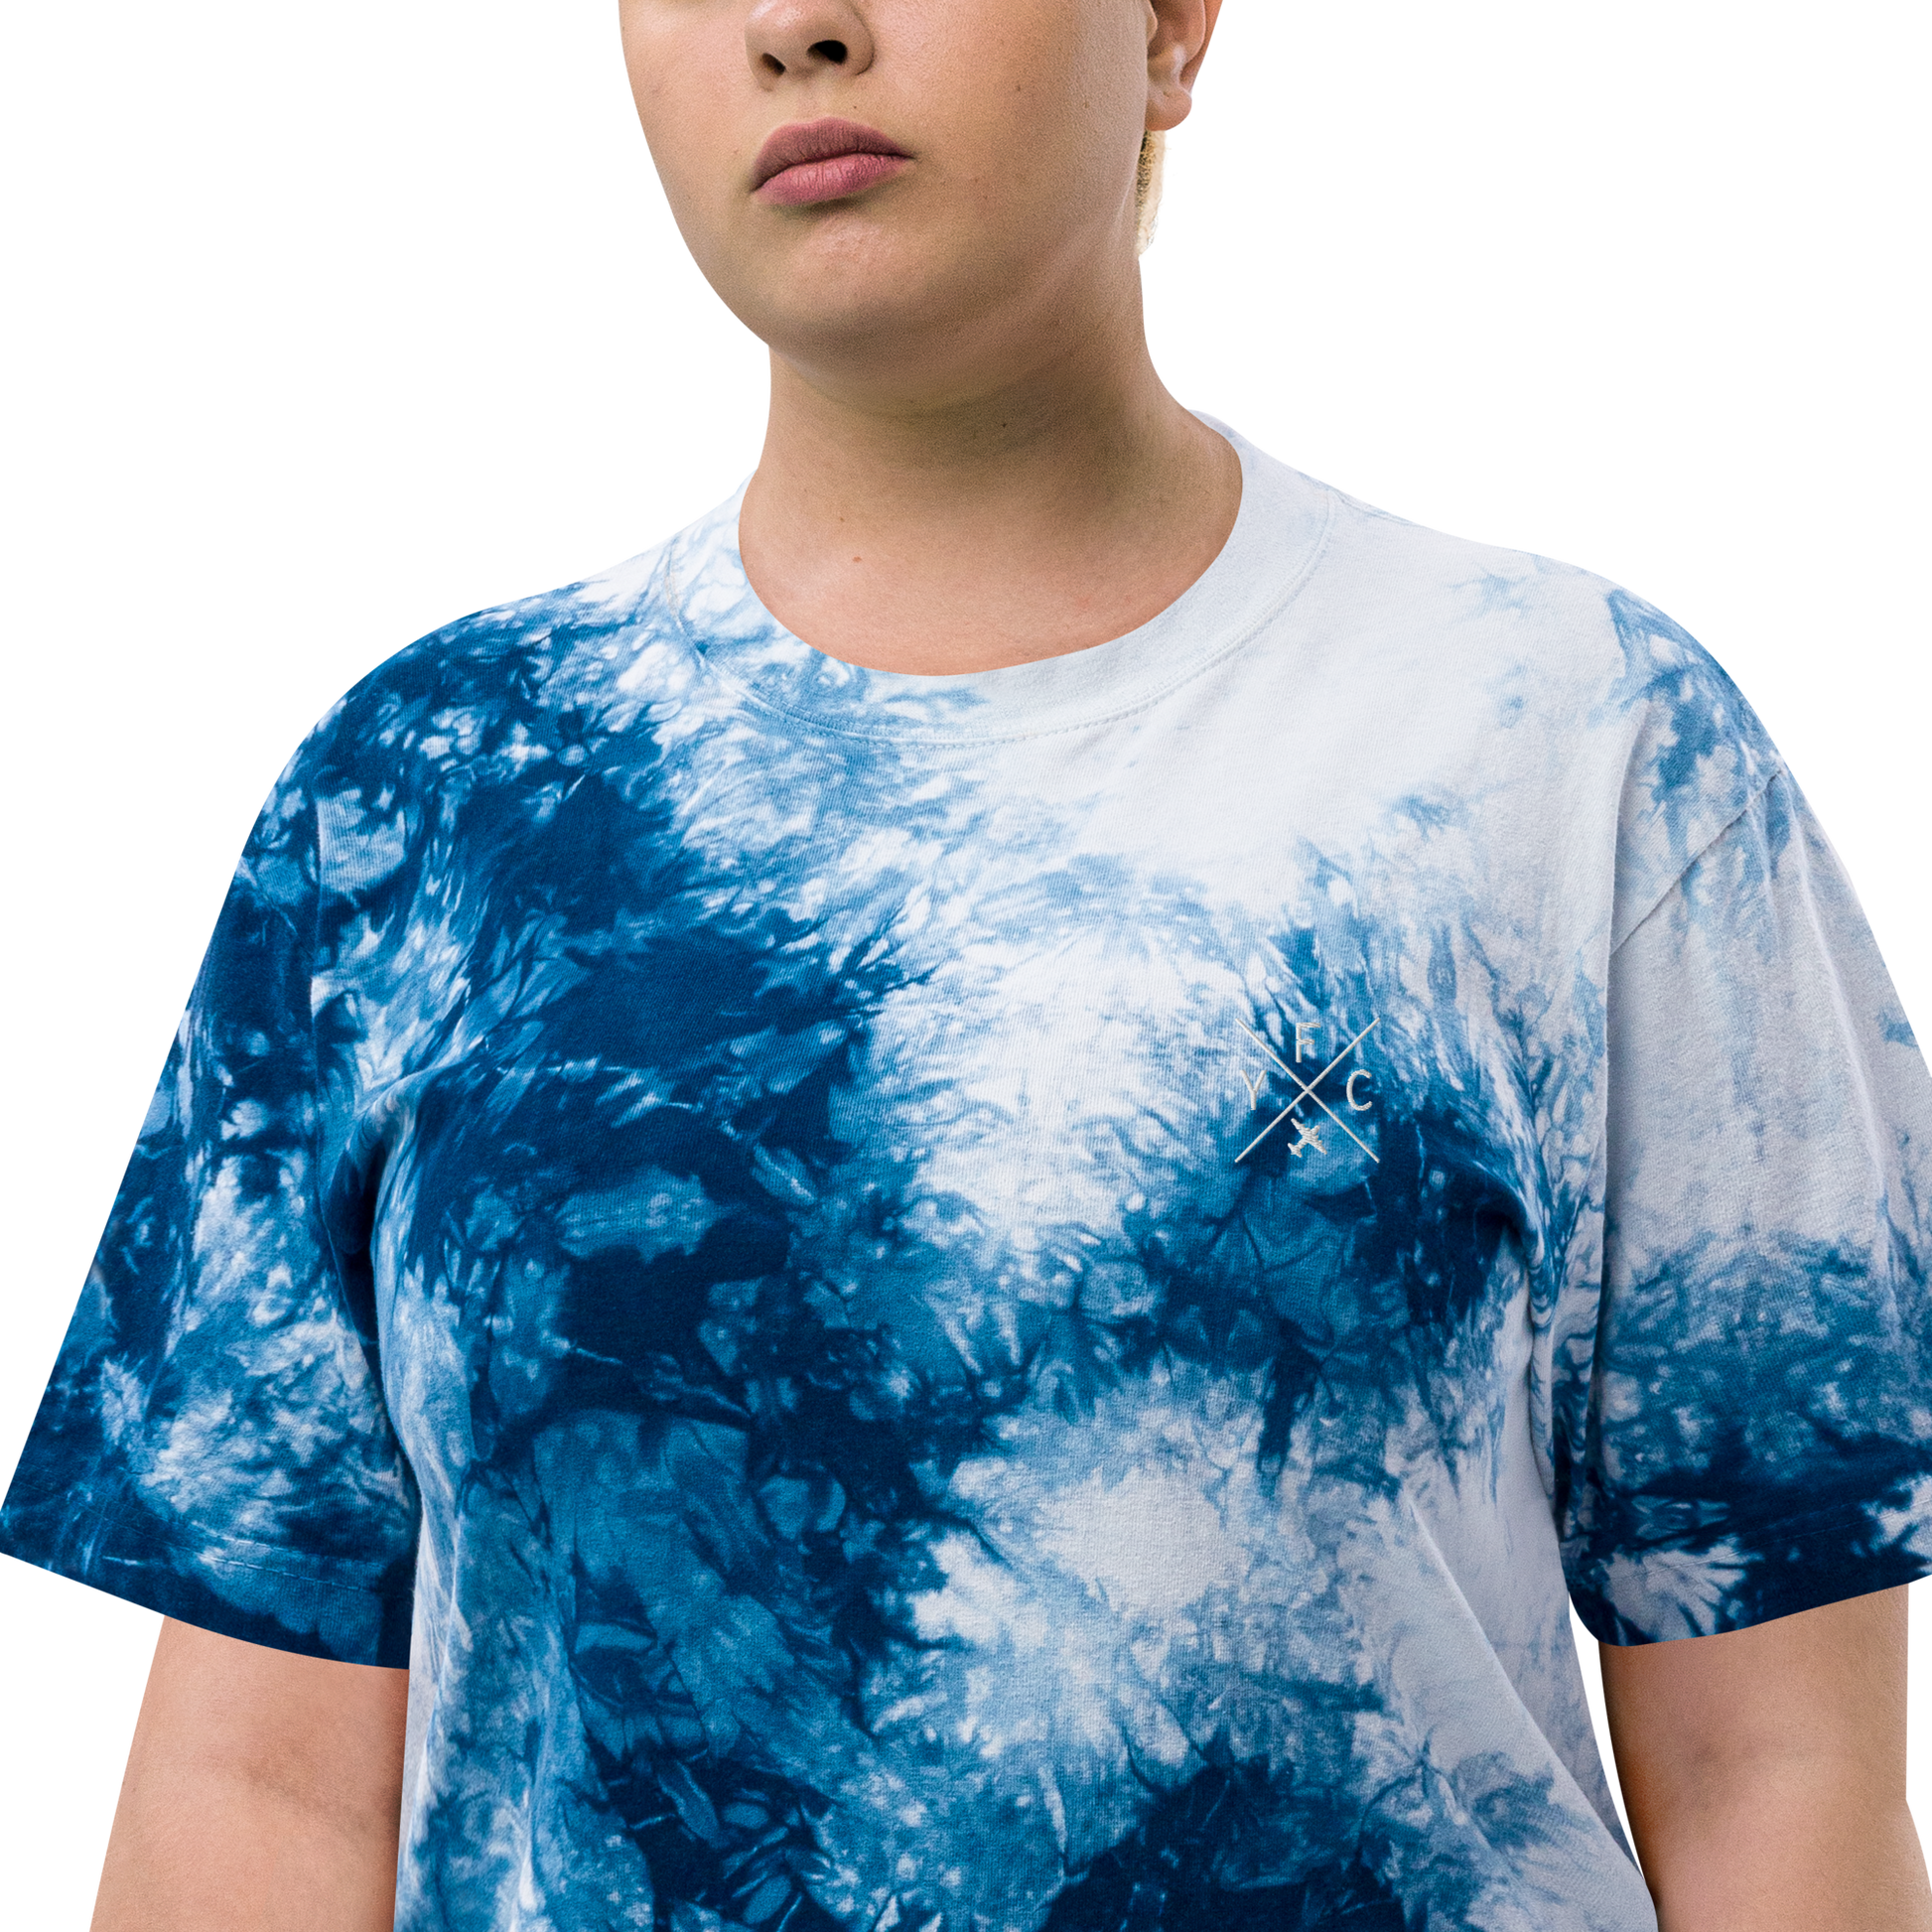 YHM Designs - YFC Fredericton Oversized Tie-Dye T-Shirt - Crossed-X Design with Airport Code and Vintage Propliner - White Embroidery - Image 10